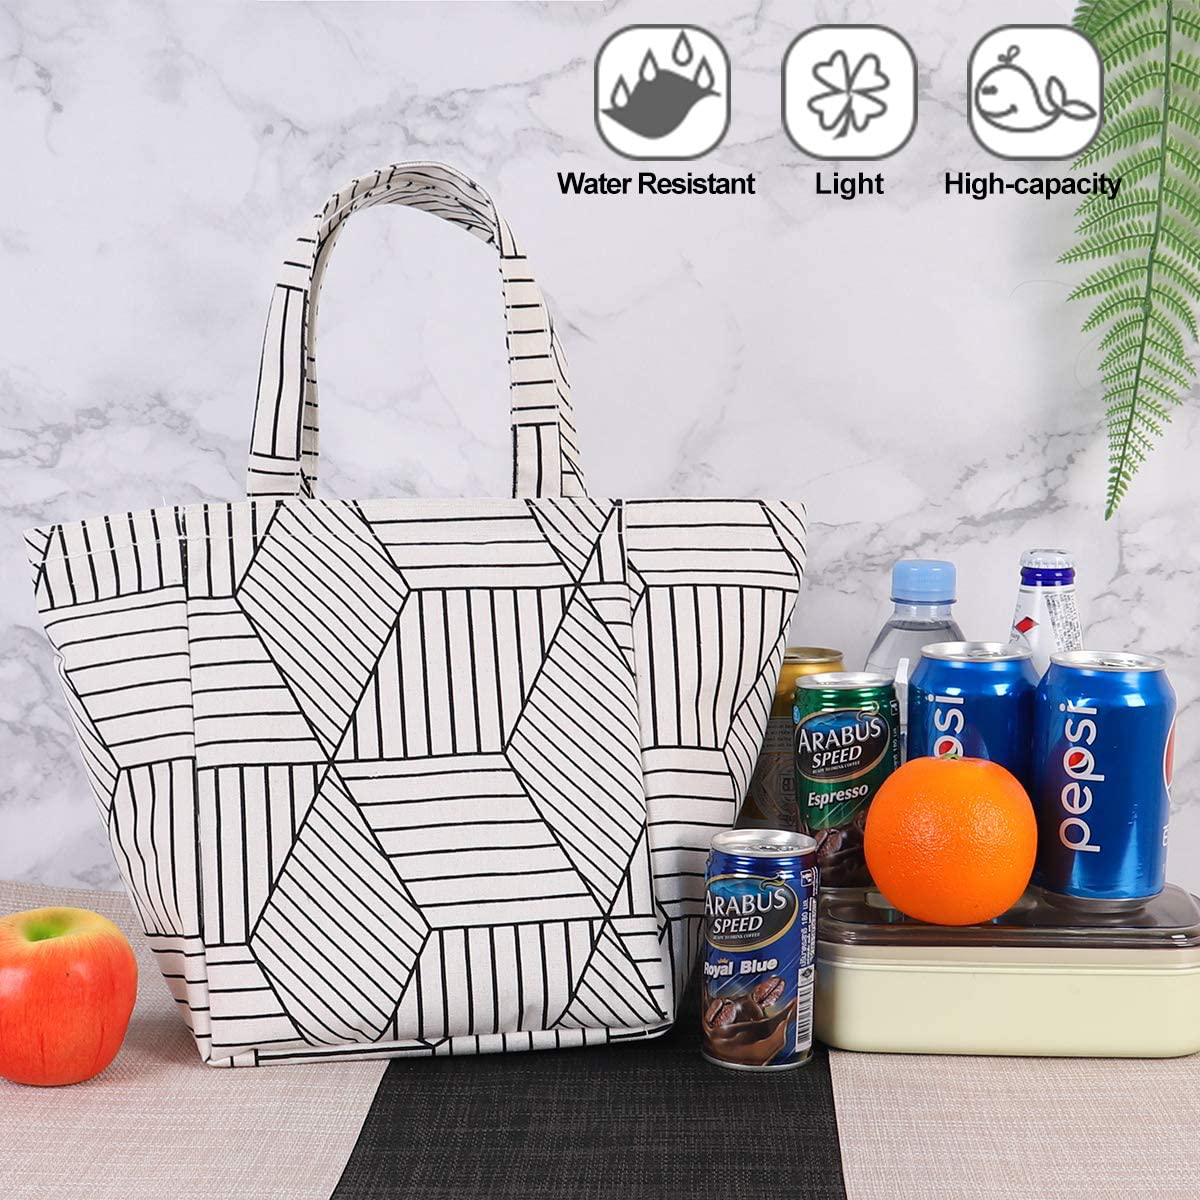 Buringer Insulated Lunch Bag with Inner Pocket Printed Canvas Fabric Reusable Cooler Tote Box for Ladies Woman Man School Work Picnic (Upgraded Black Plaid)